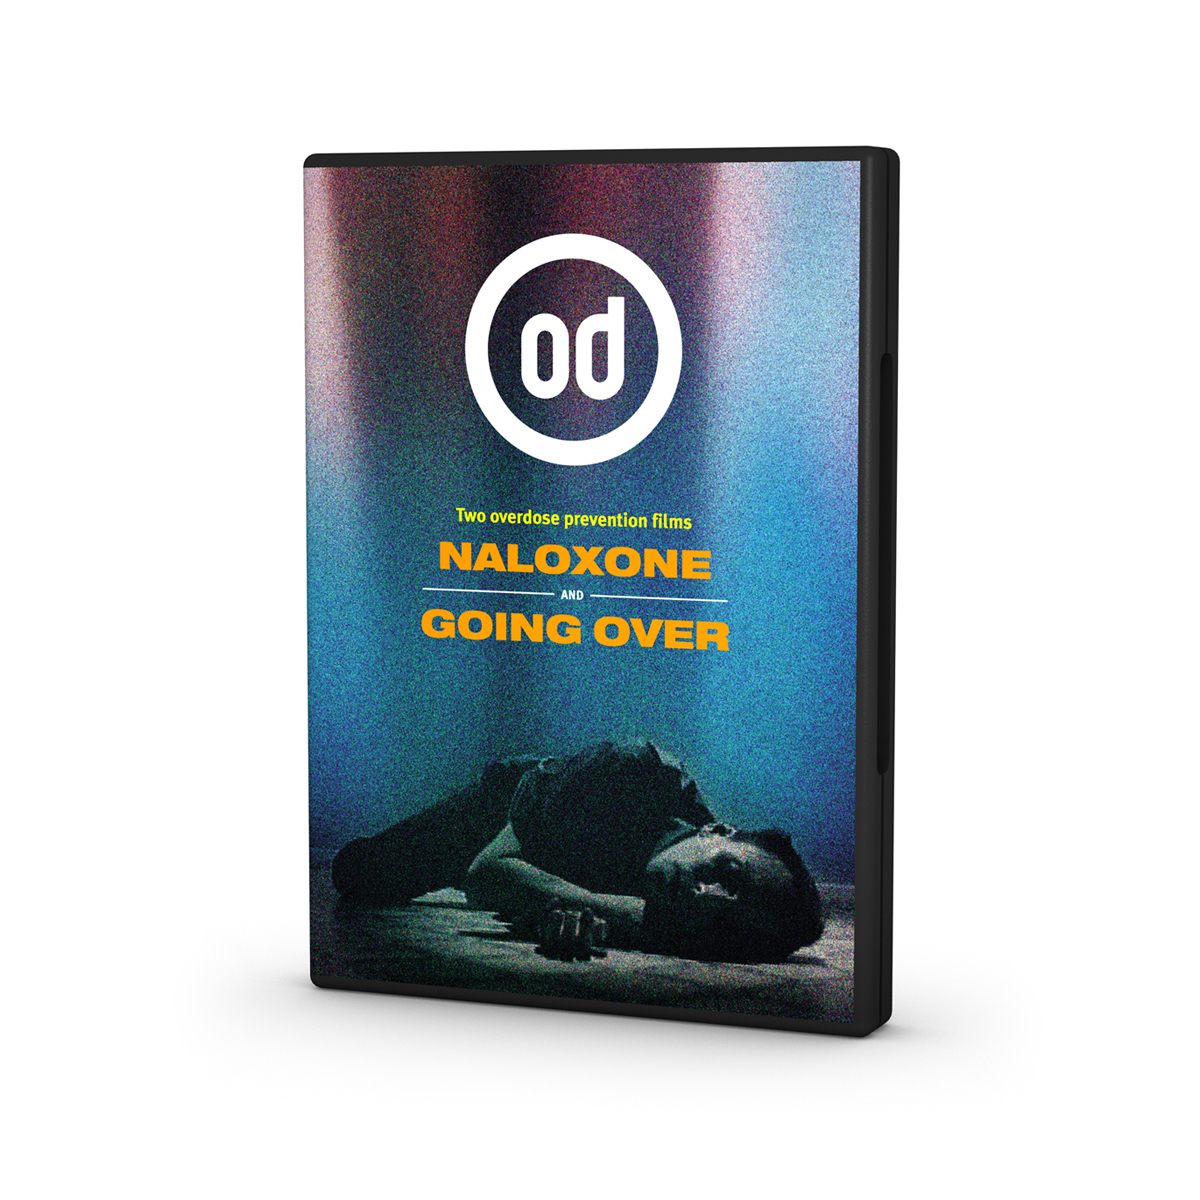 Naloxone and Going Over DVD (display case)